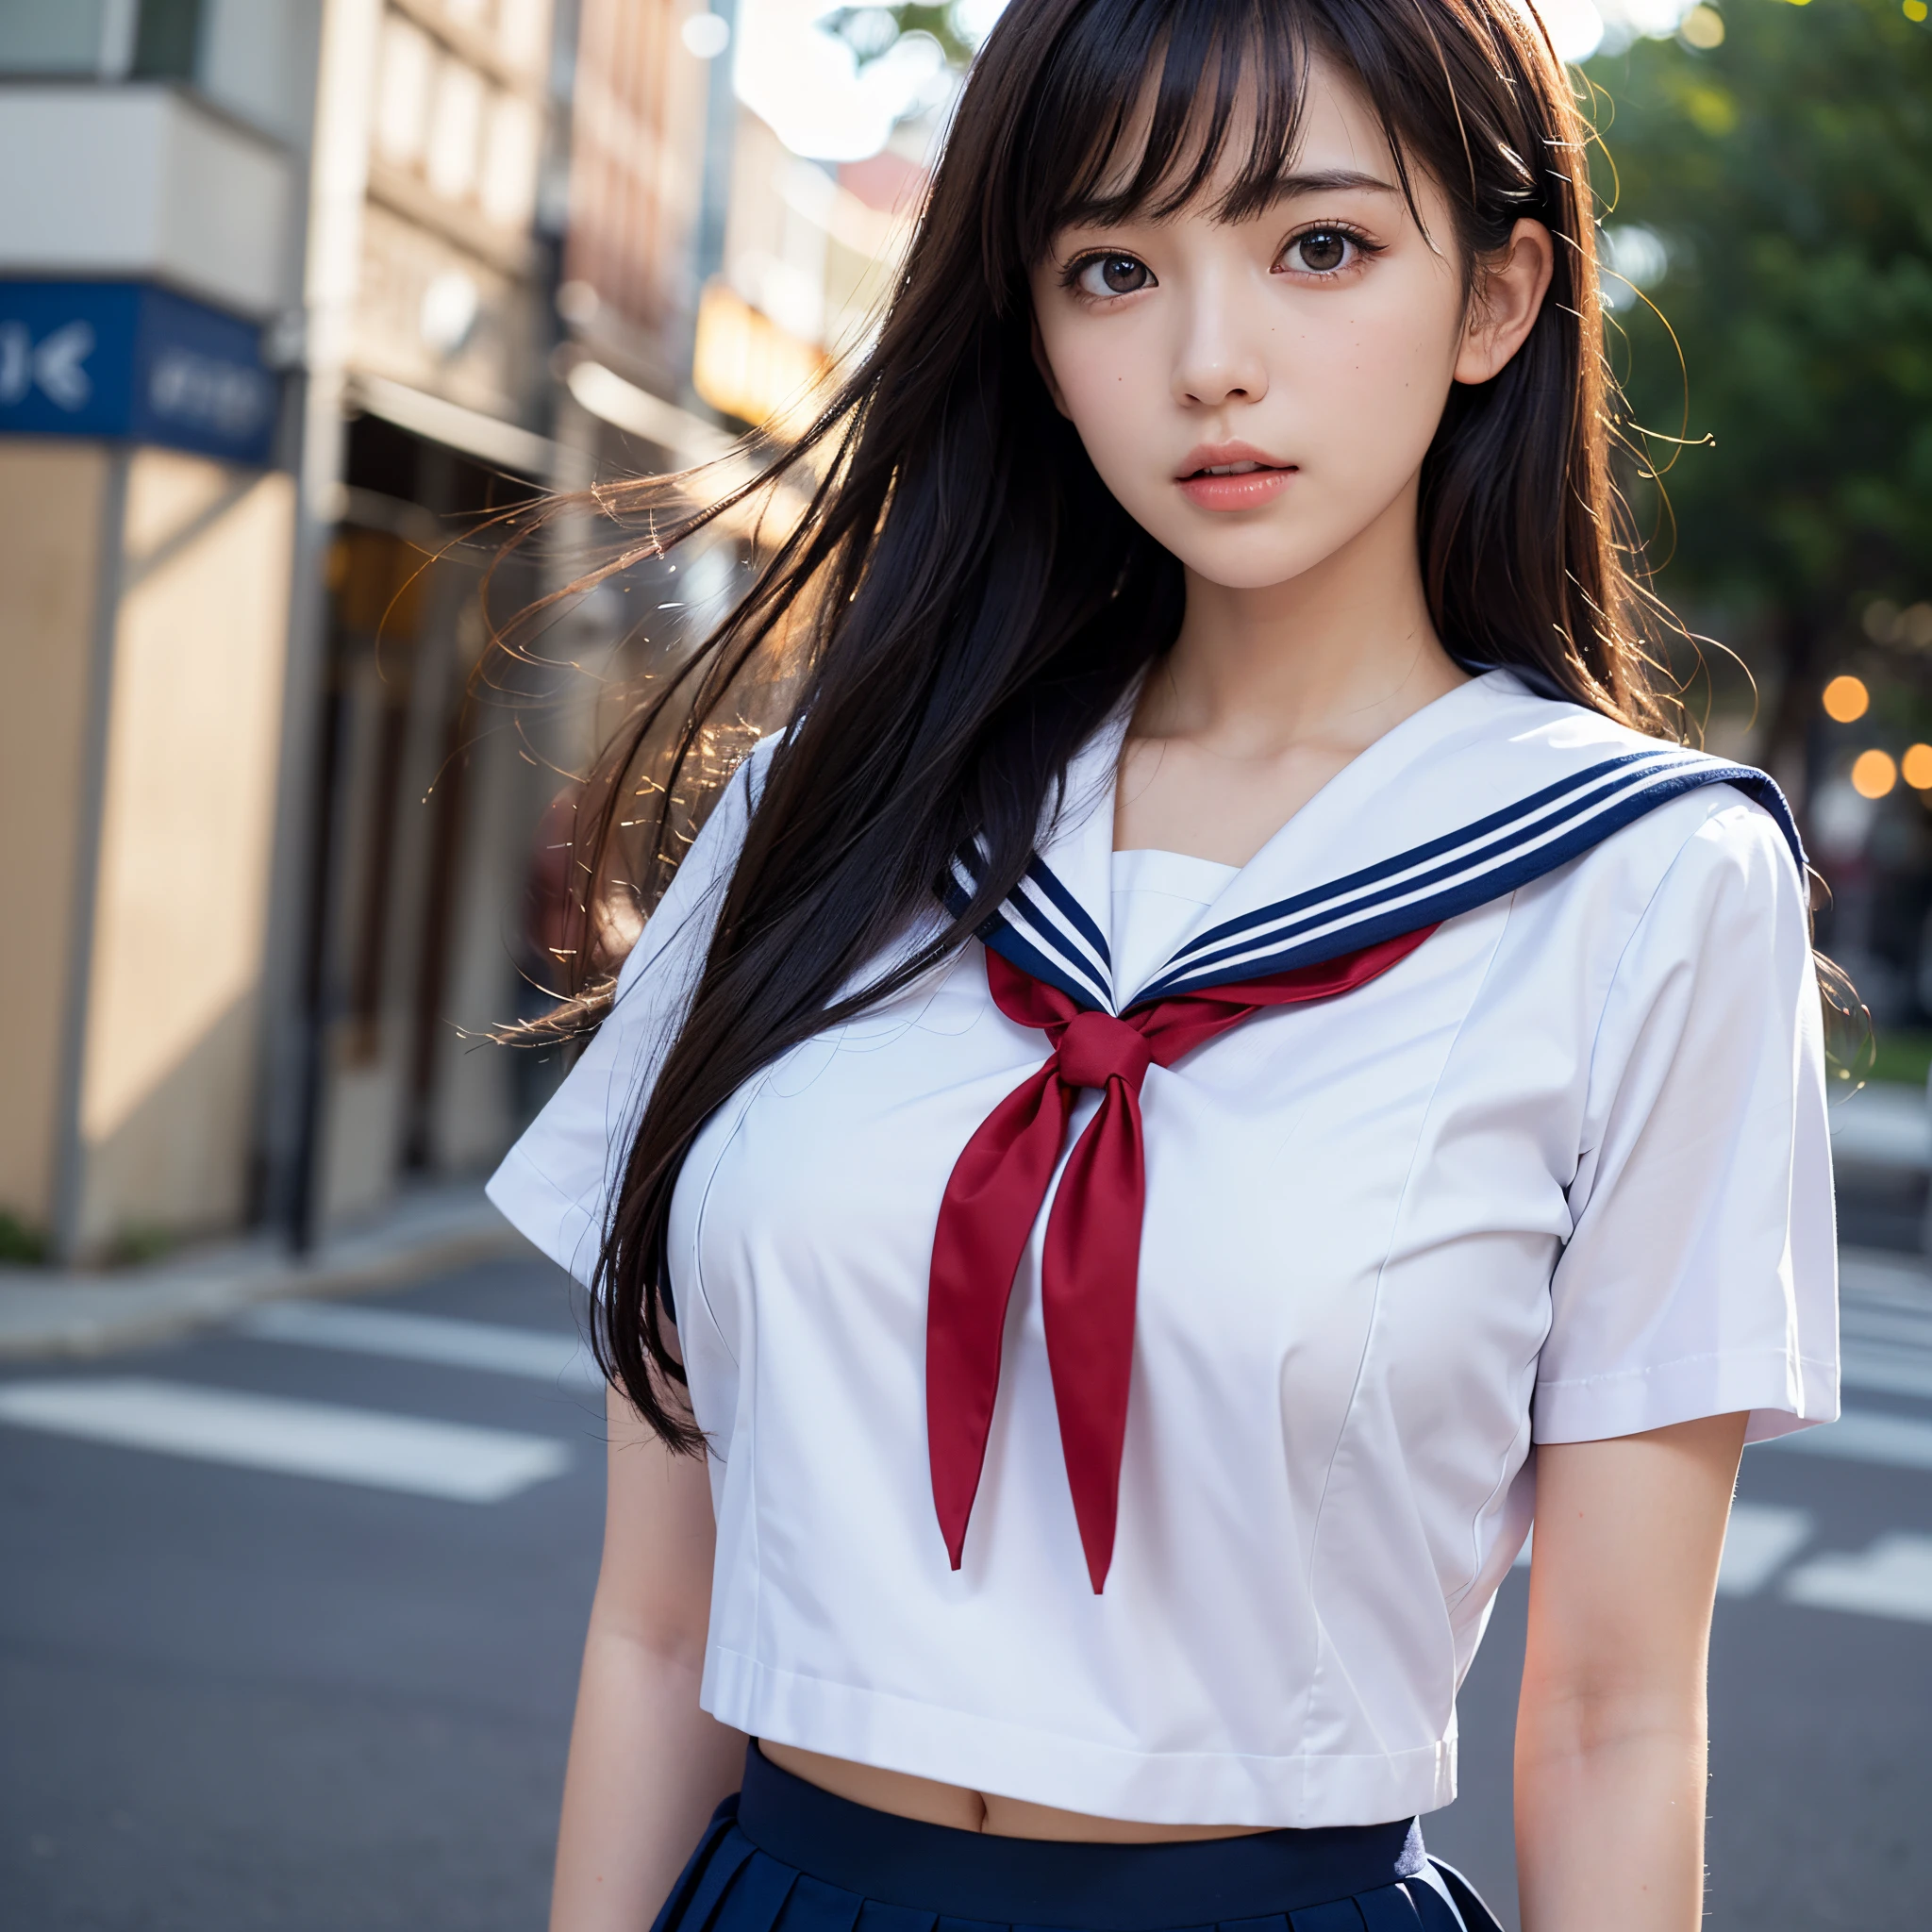 (masutepiece, Best Quality:1.2), 8K, Official art, Raw photo,  (Upper body, Sailor Uniform,:1.4), a beauty girl, Idol face, pleatedskirt, ,  ((Colossal tits))Short sleeve,  Cinematic lighting, Detailed face, Bokeh background, 1 girl in　(Detailed, hightquality, realistic depiction of eyes:1.3)